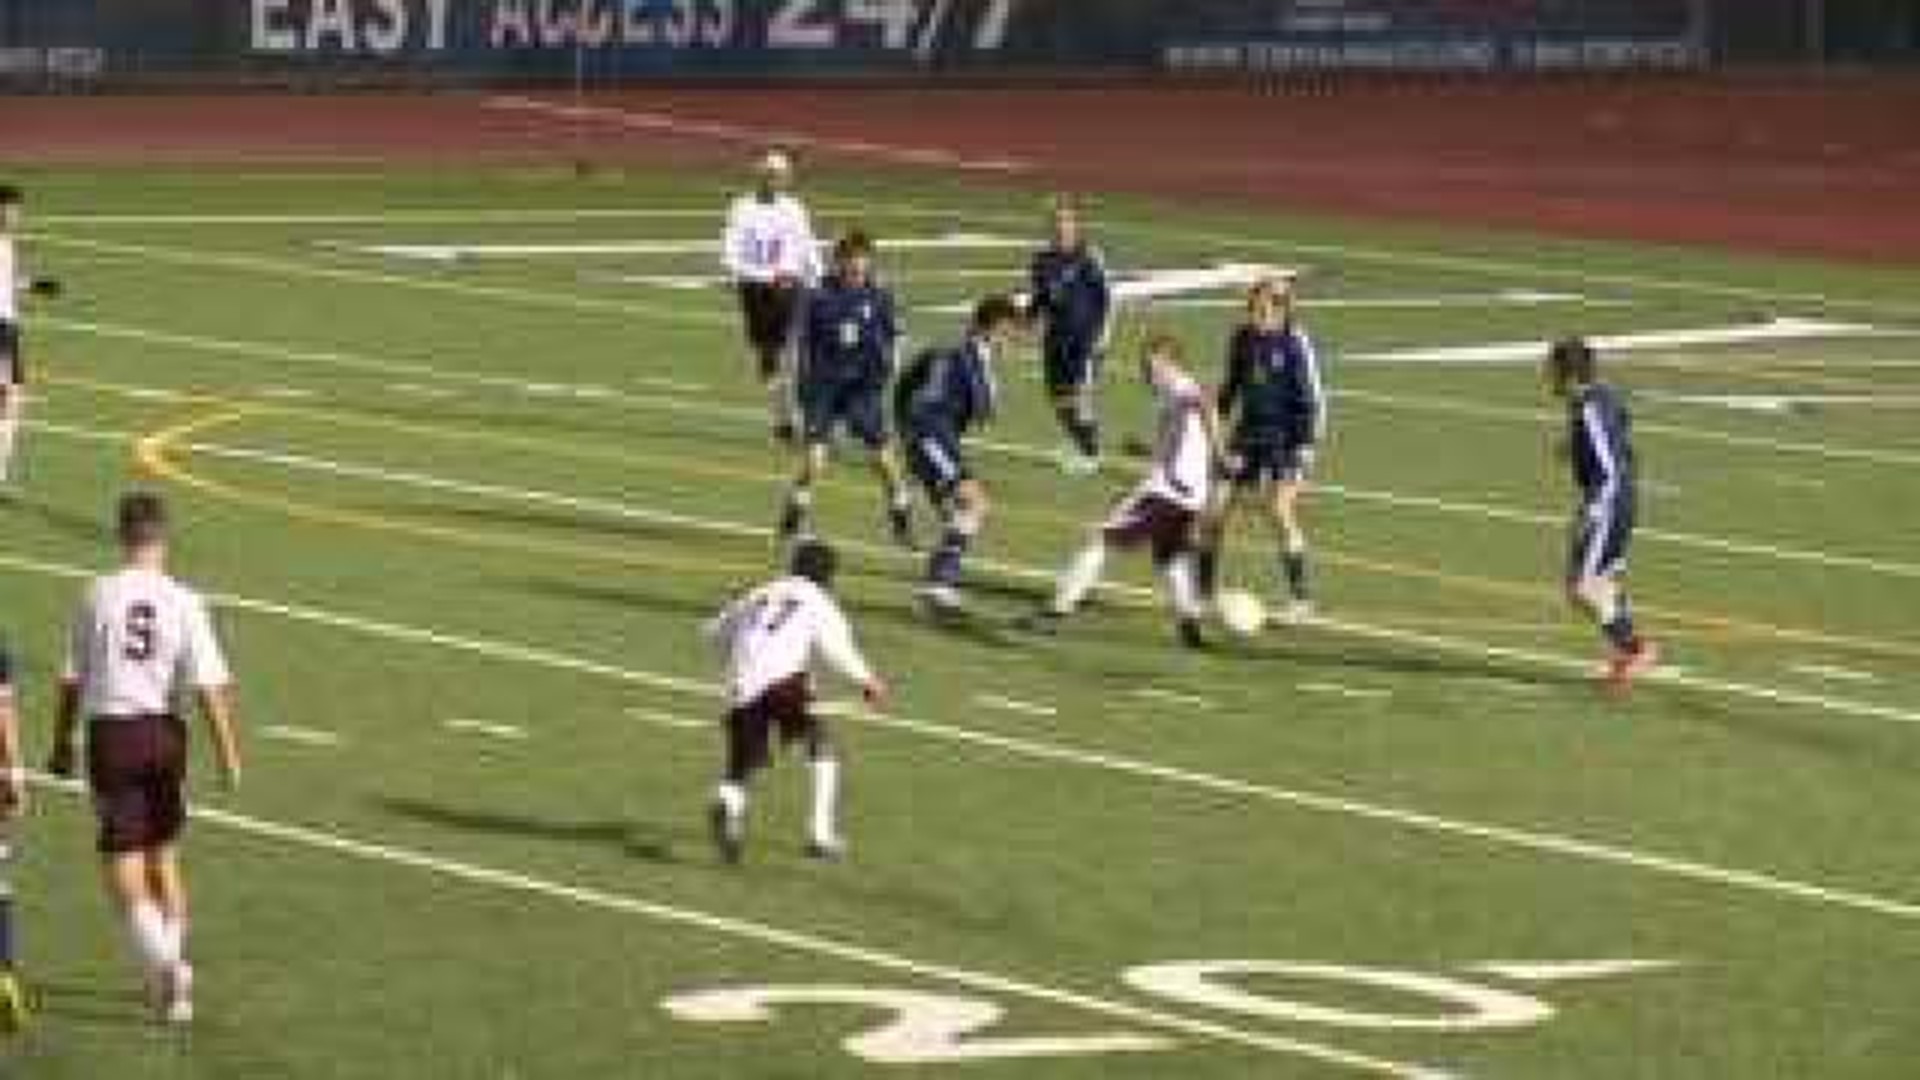 Wyoming Valley West vs Abington Heights Soccer